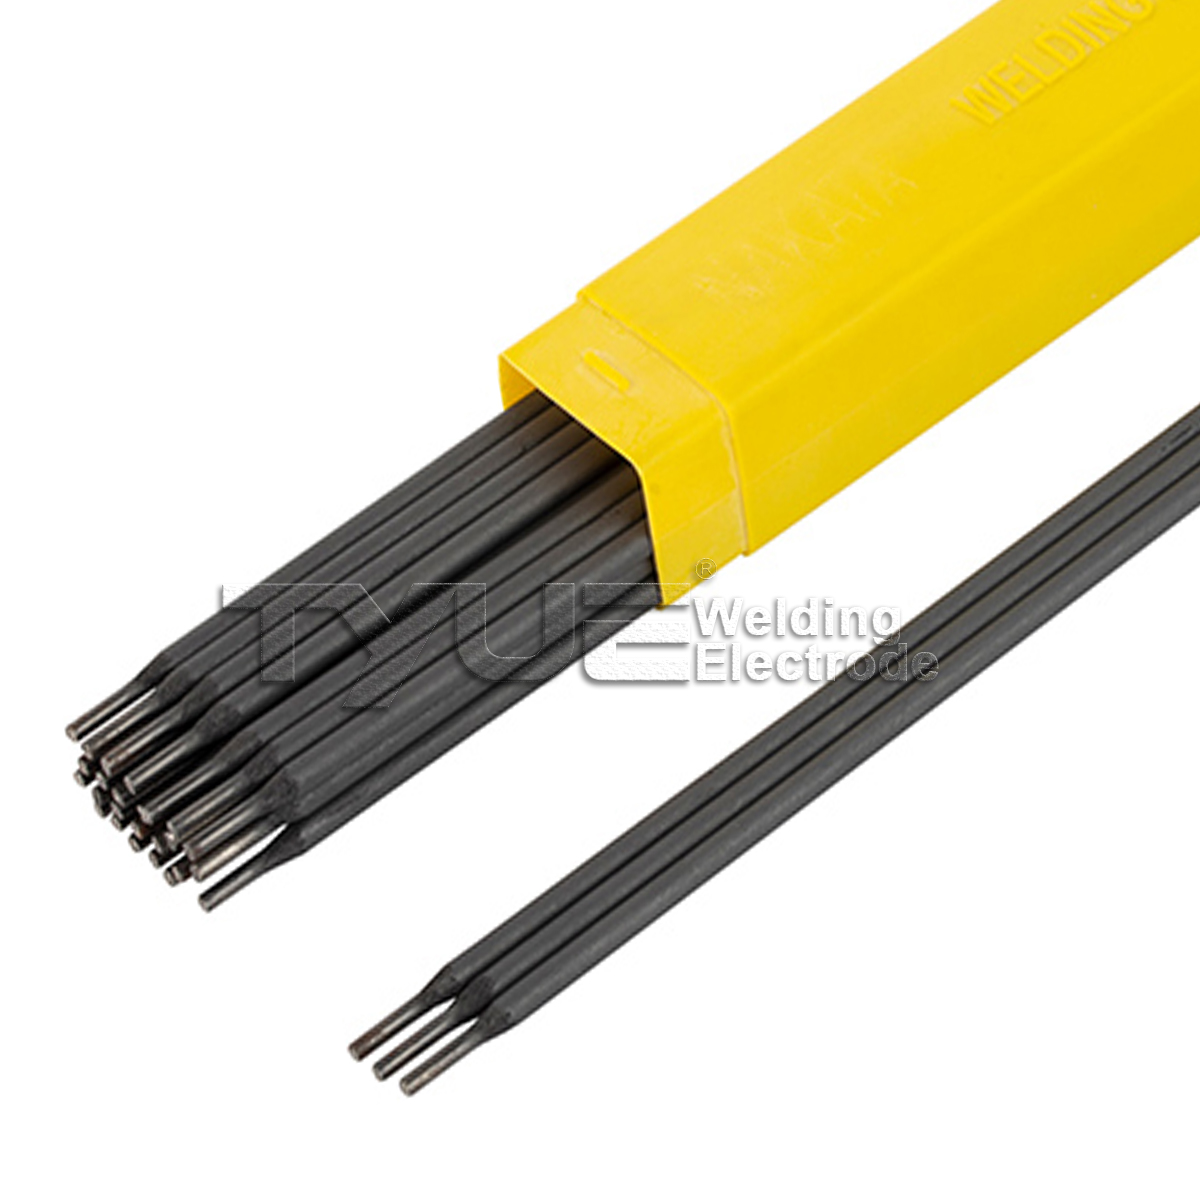 GB/T EZNiCu-1 (Z508) Cast Iron Welding Electrode Nickel-Copper Alloy (Monel) Core and Graphitized Coating Featured Image